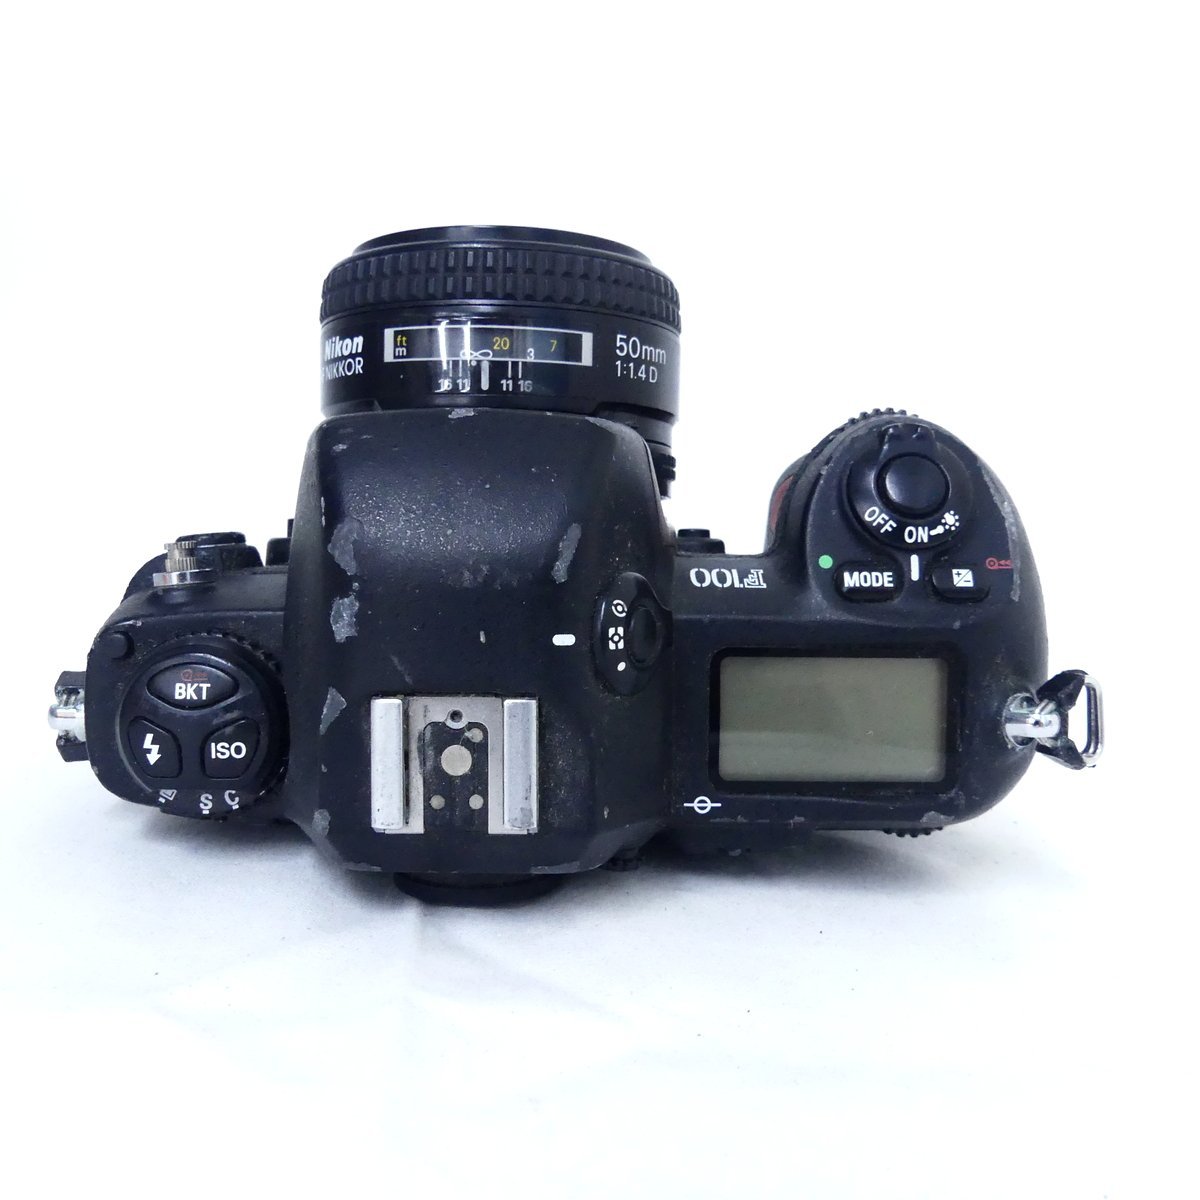 Nikon ニコン F100 + AF NIKKOR 50mm F1.4 D フィルムカメラ 現状品 USED /2310C_画像5